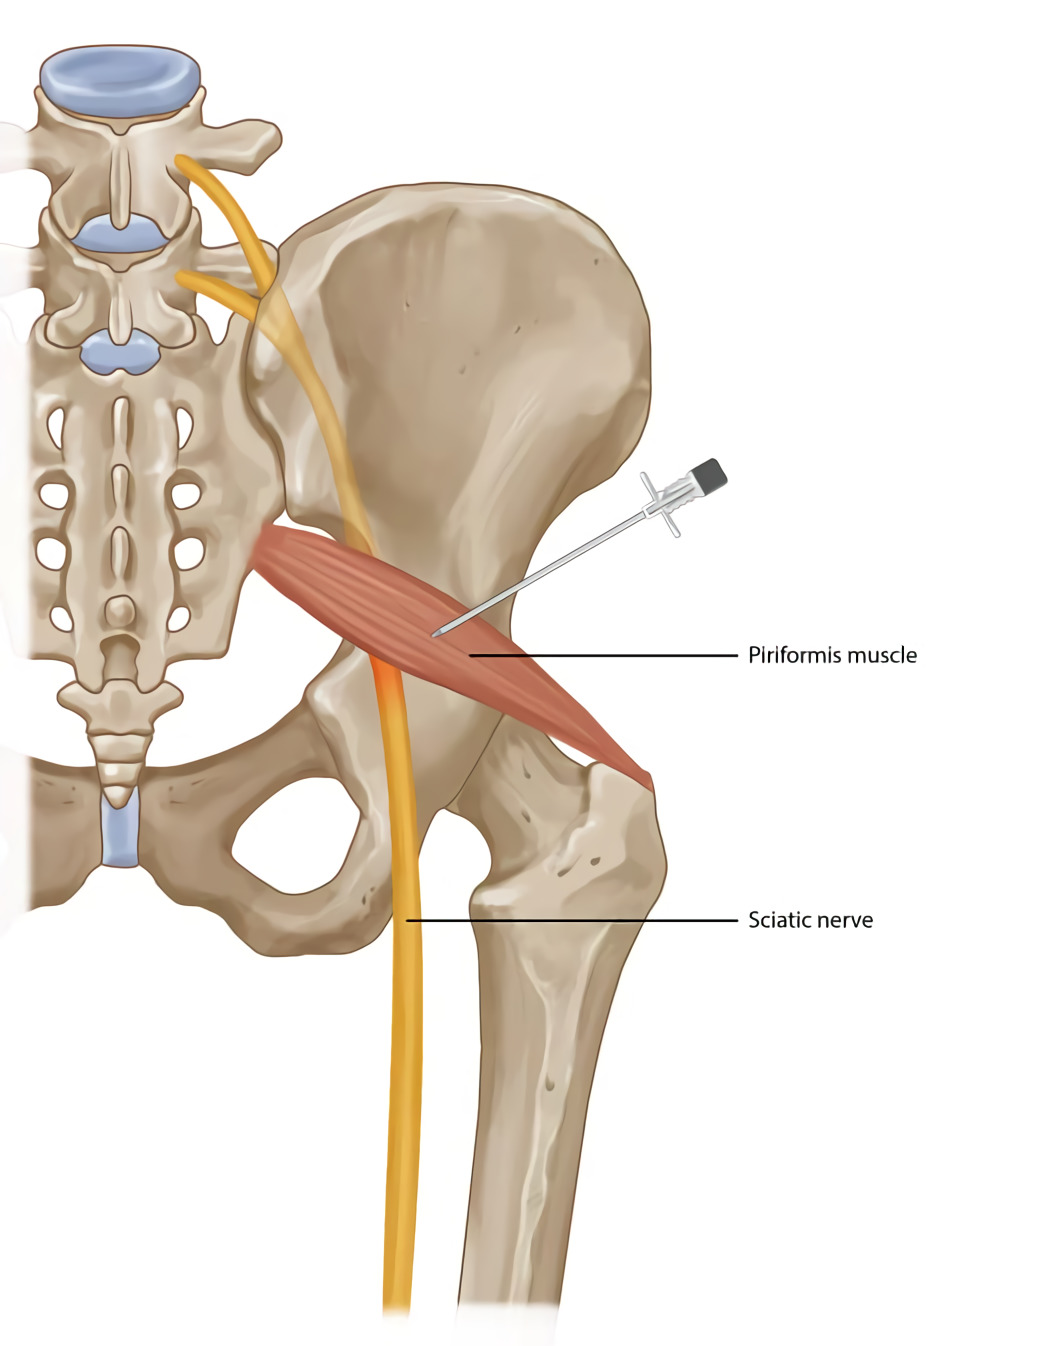 What Is The Piriformis Muscle & Why Does It Hurt So Much?